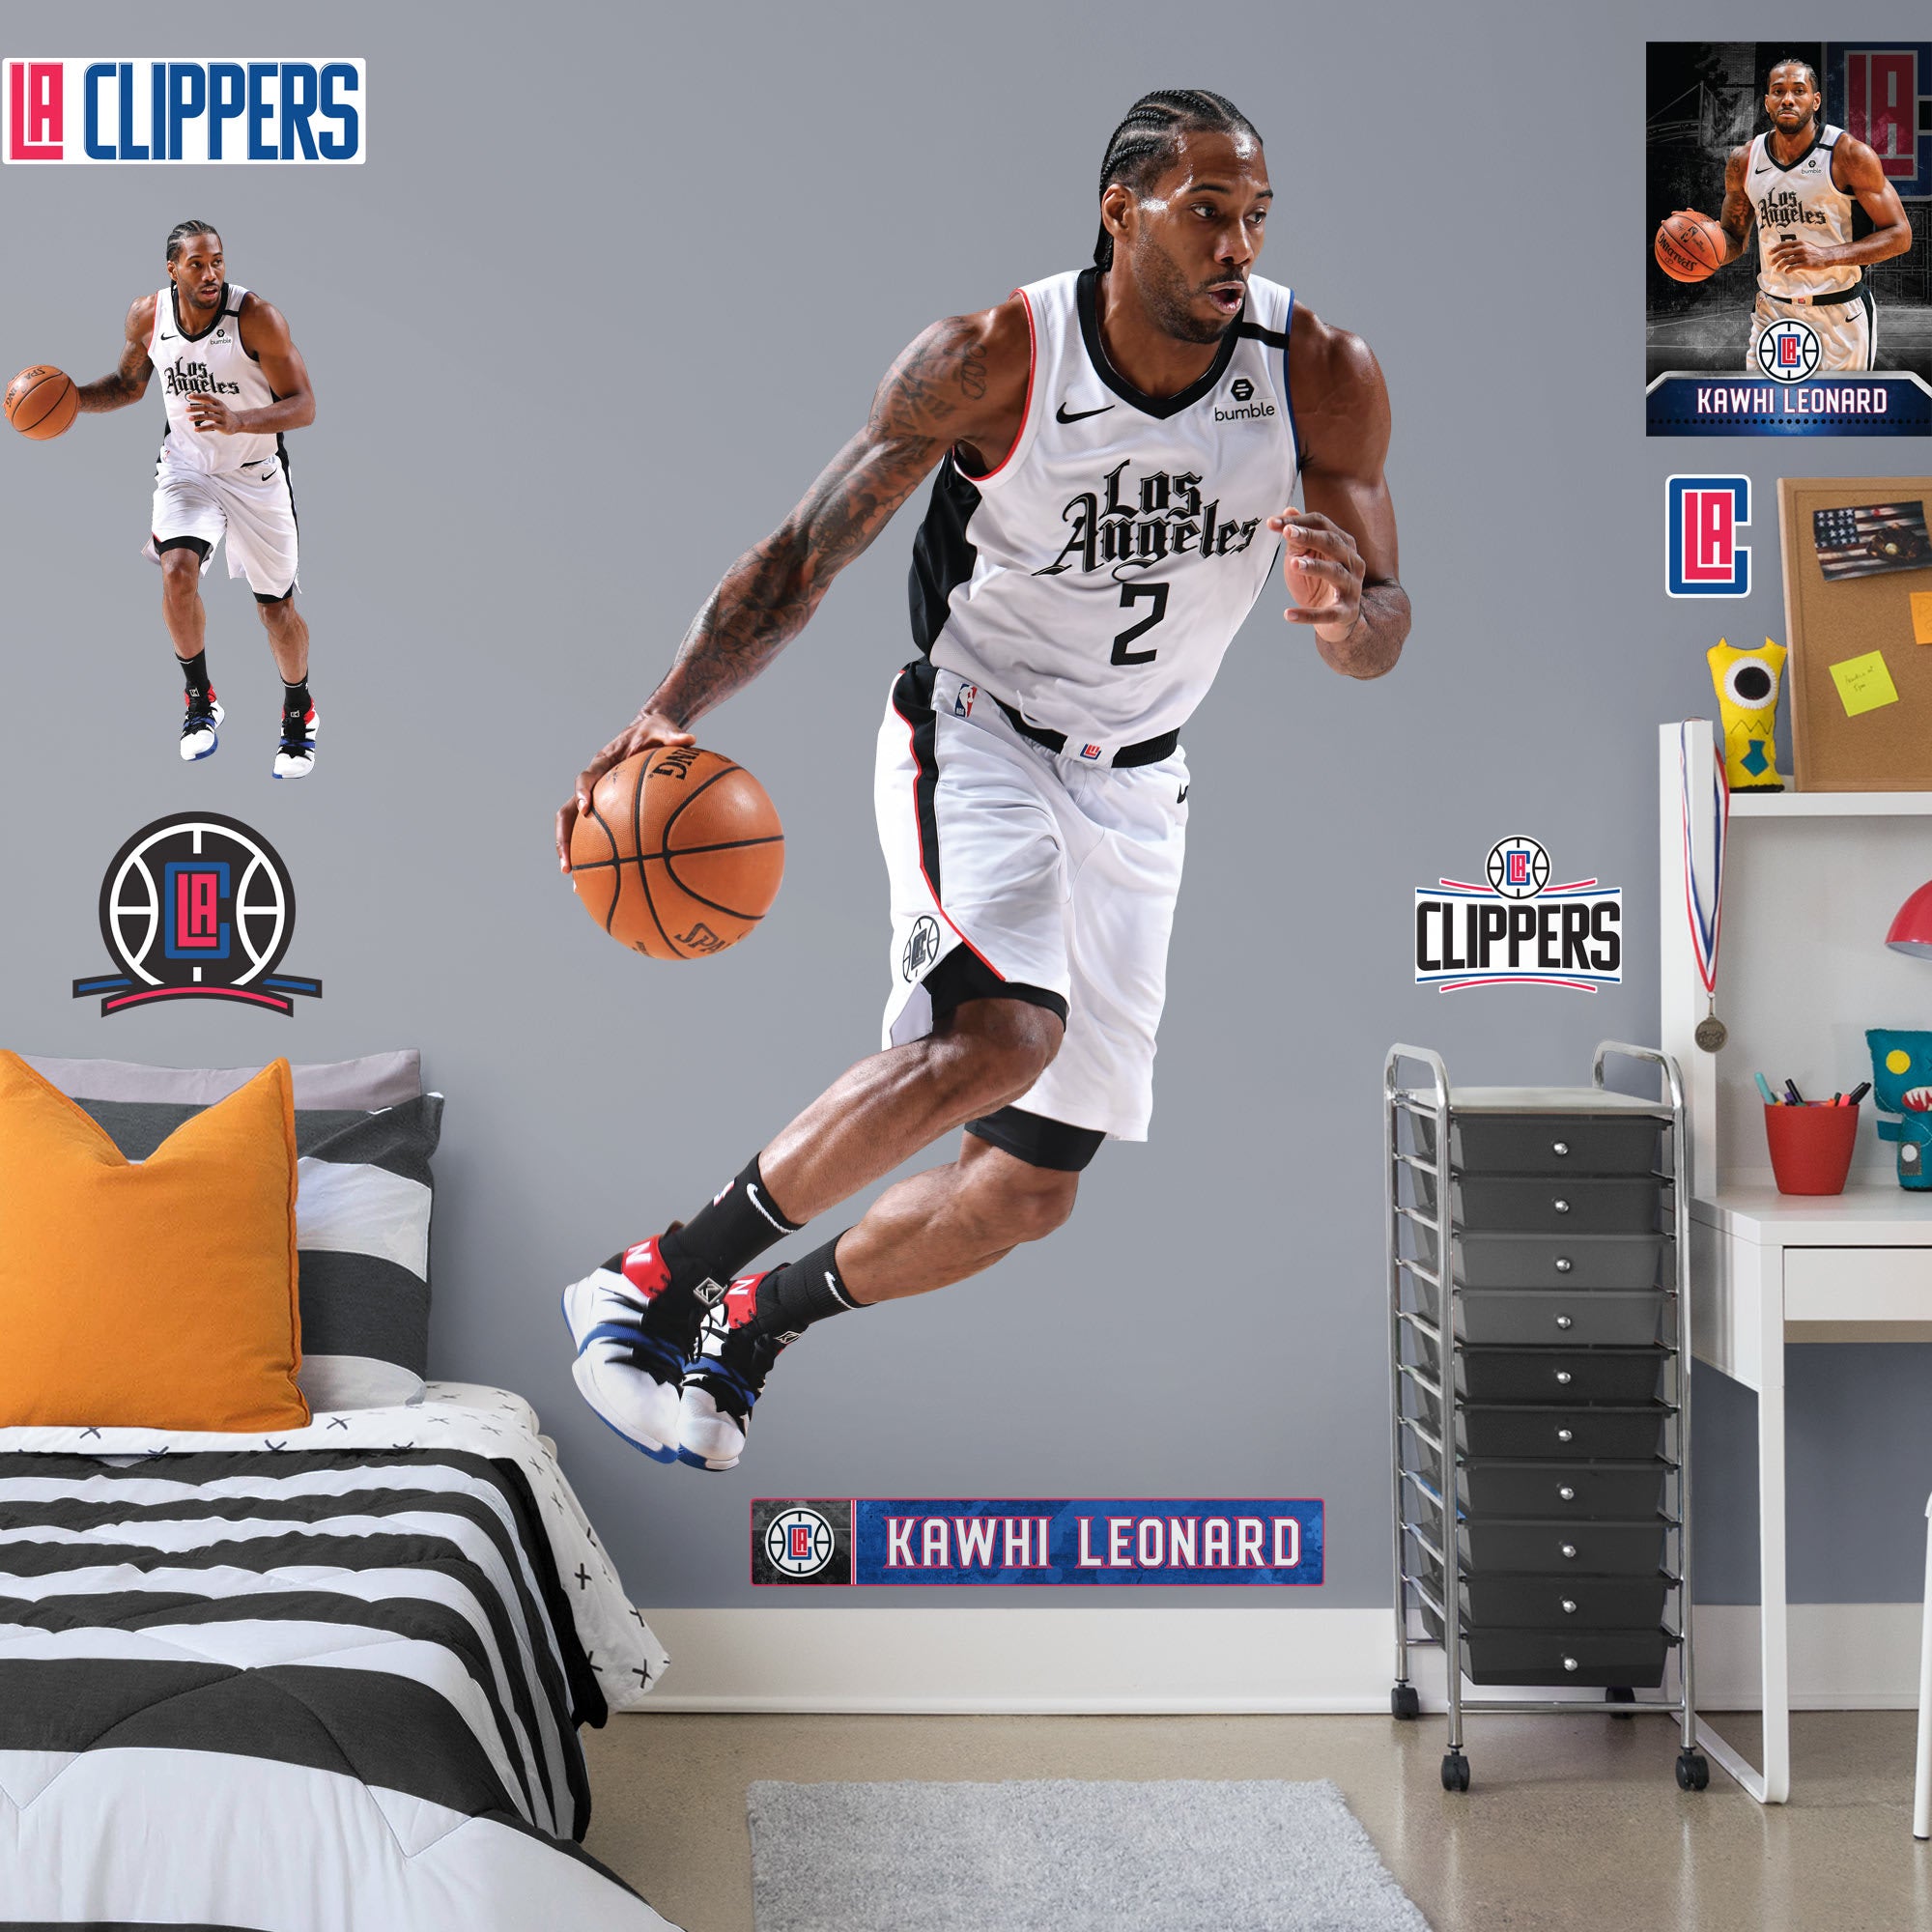 Kawhi Leonard for Los Angeles Clippers: City Jersey - Officially Licensed NBA Removable Wall Decal Life-Size Athlete + 10 Decals